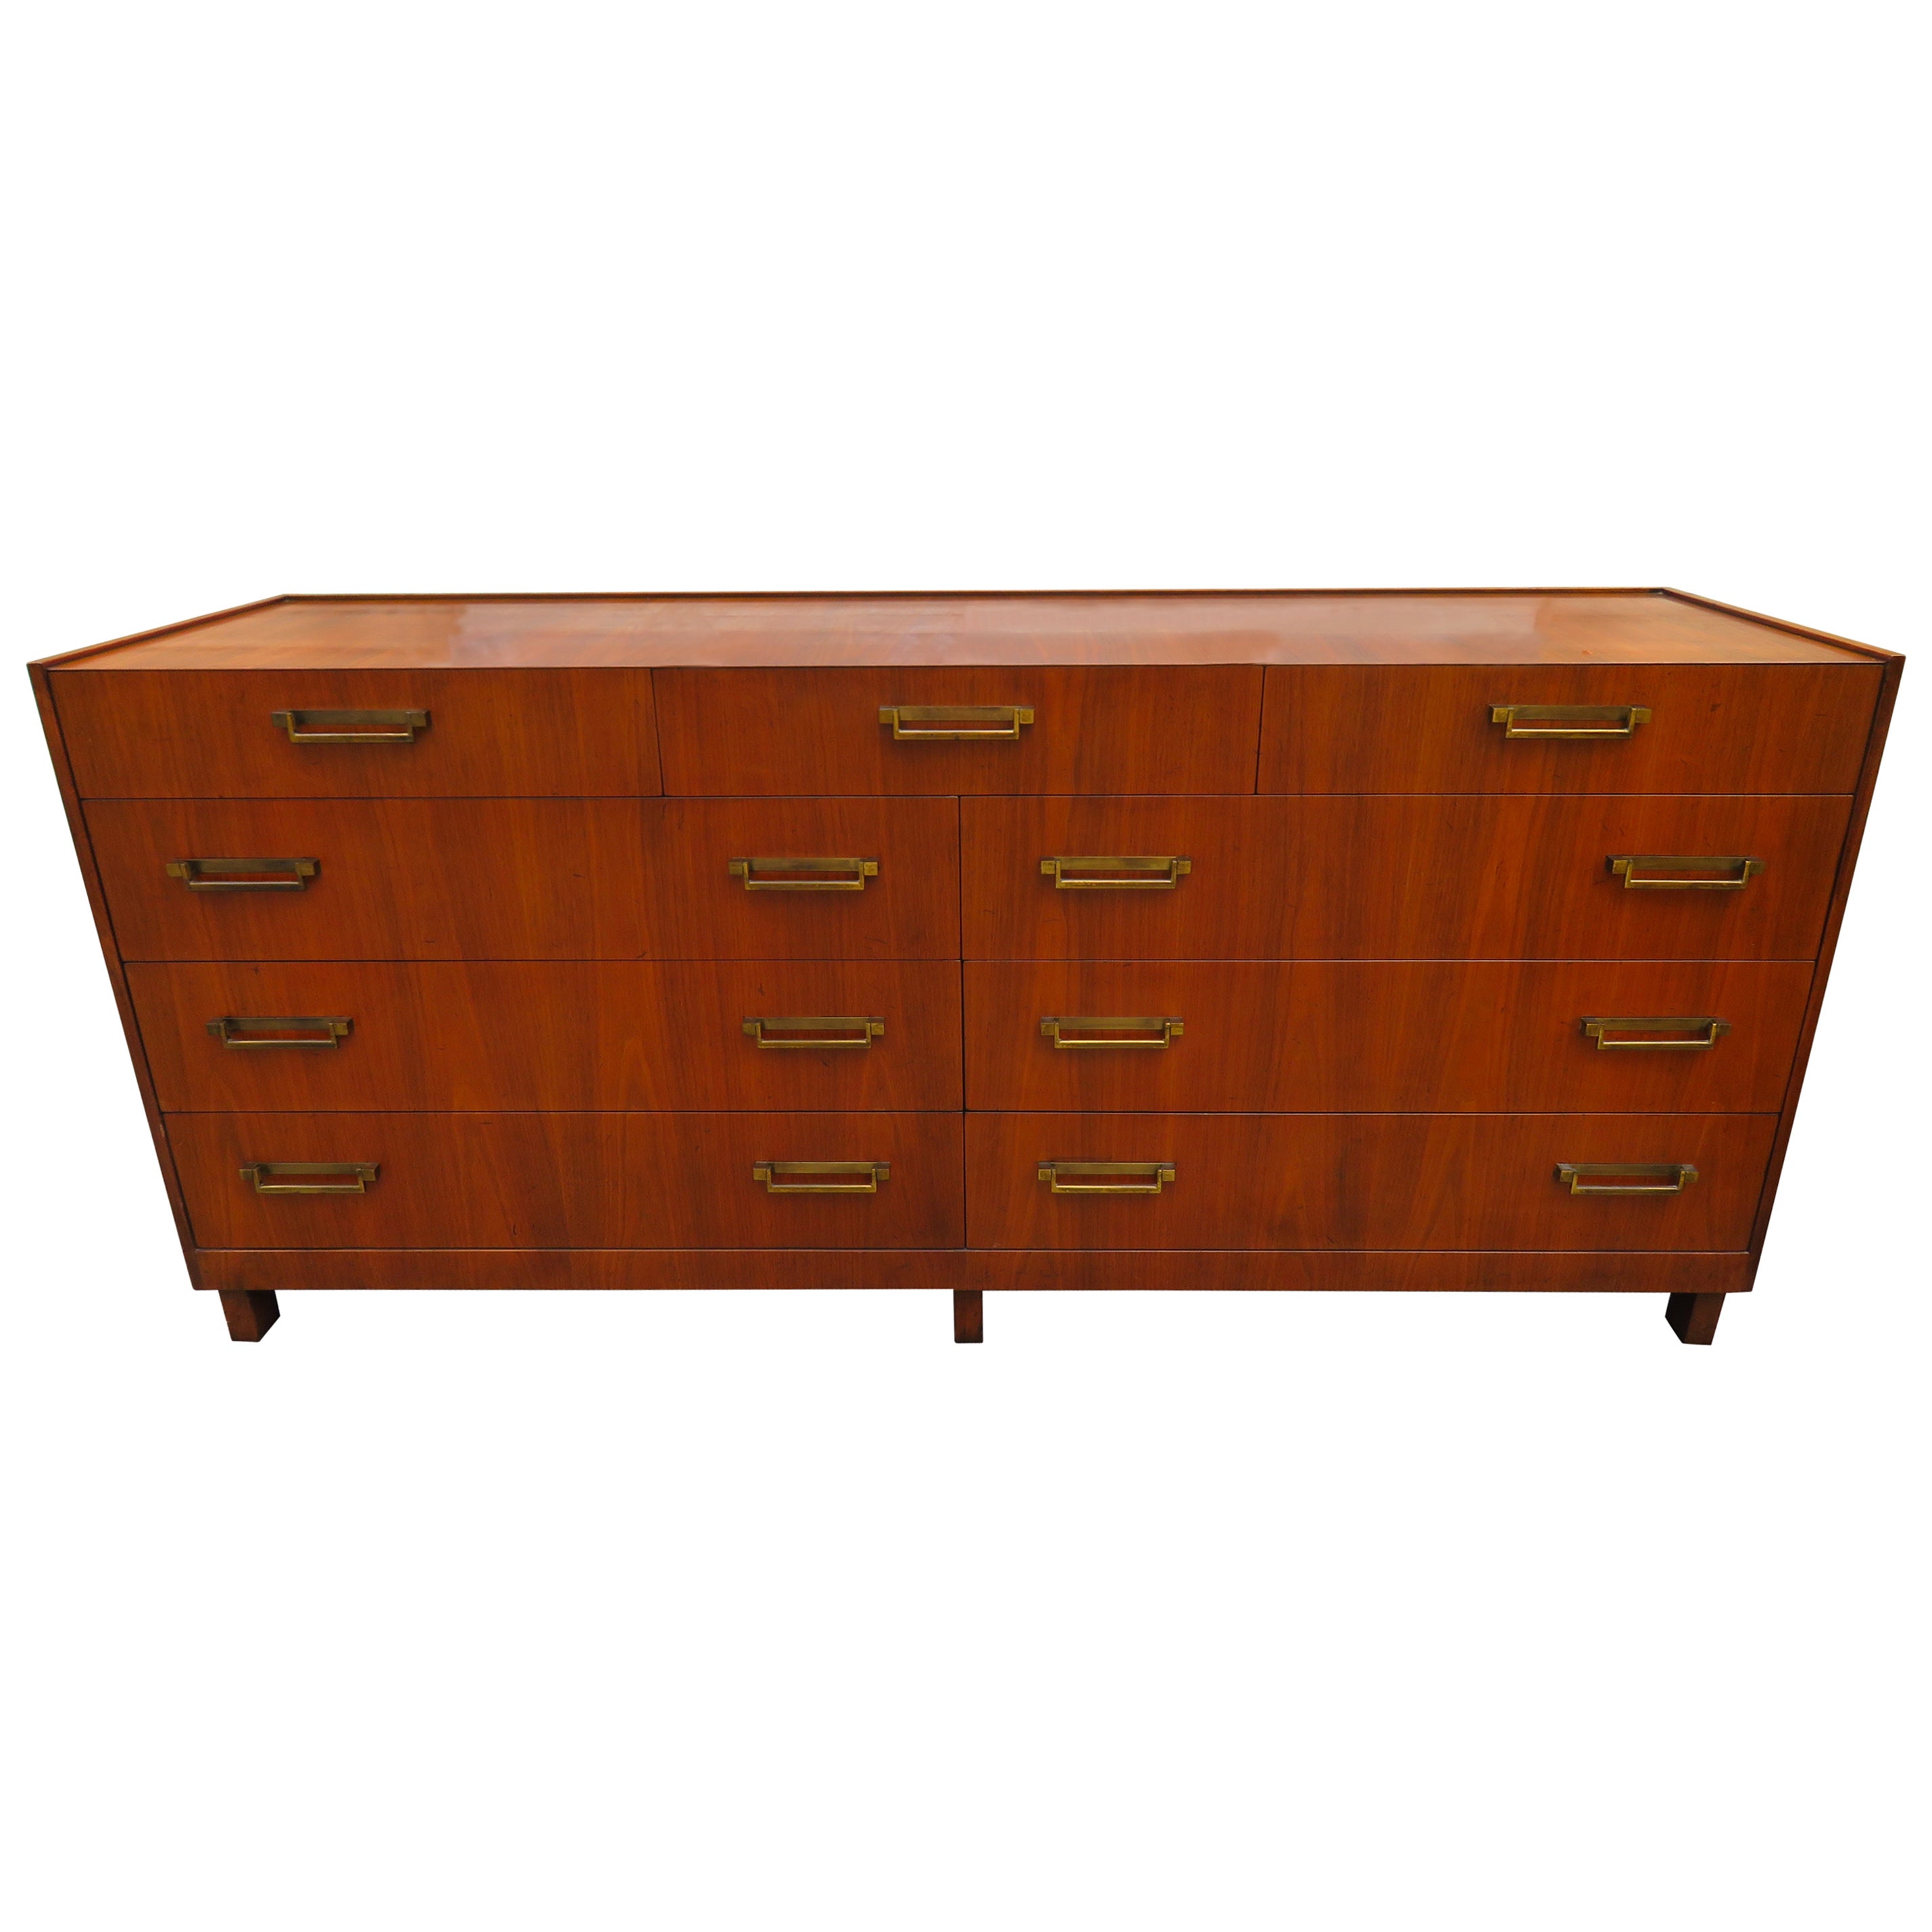 Magnificent Michael Taylor Baker Campaign Chest Mid-Century Modern